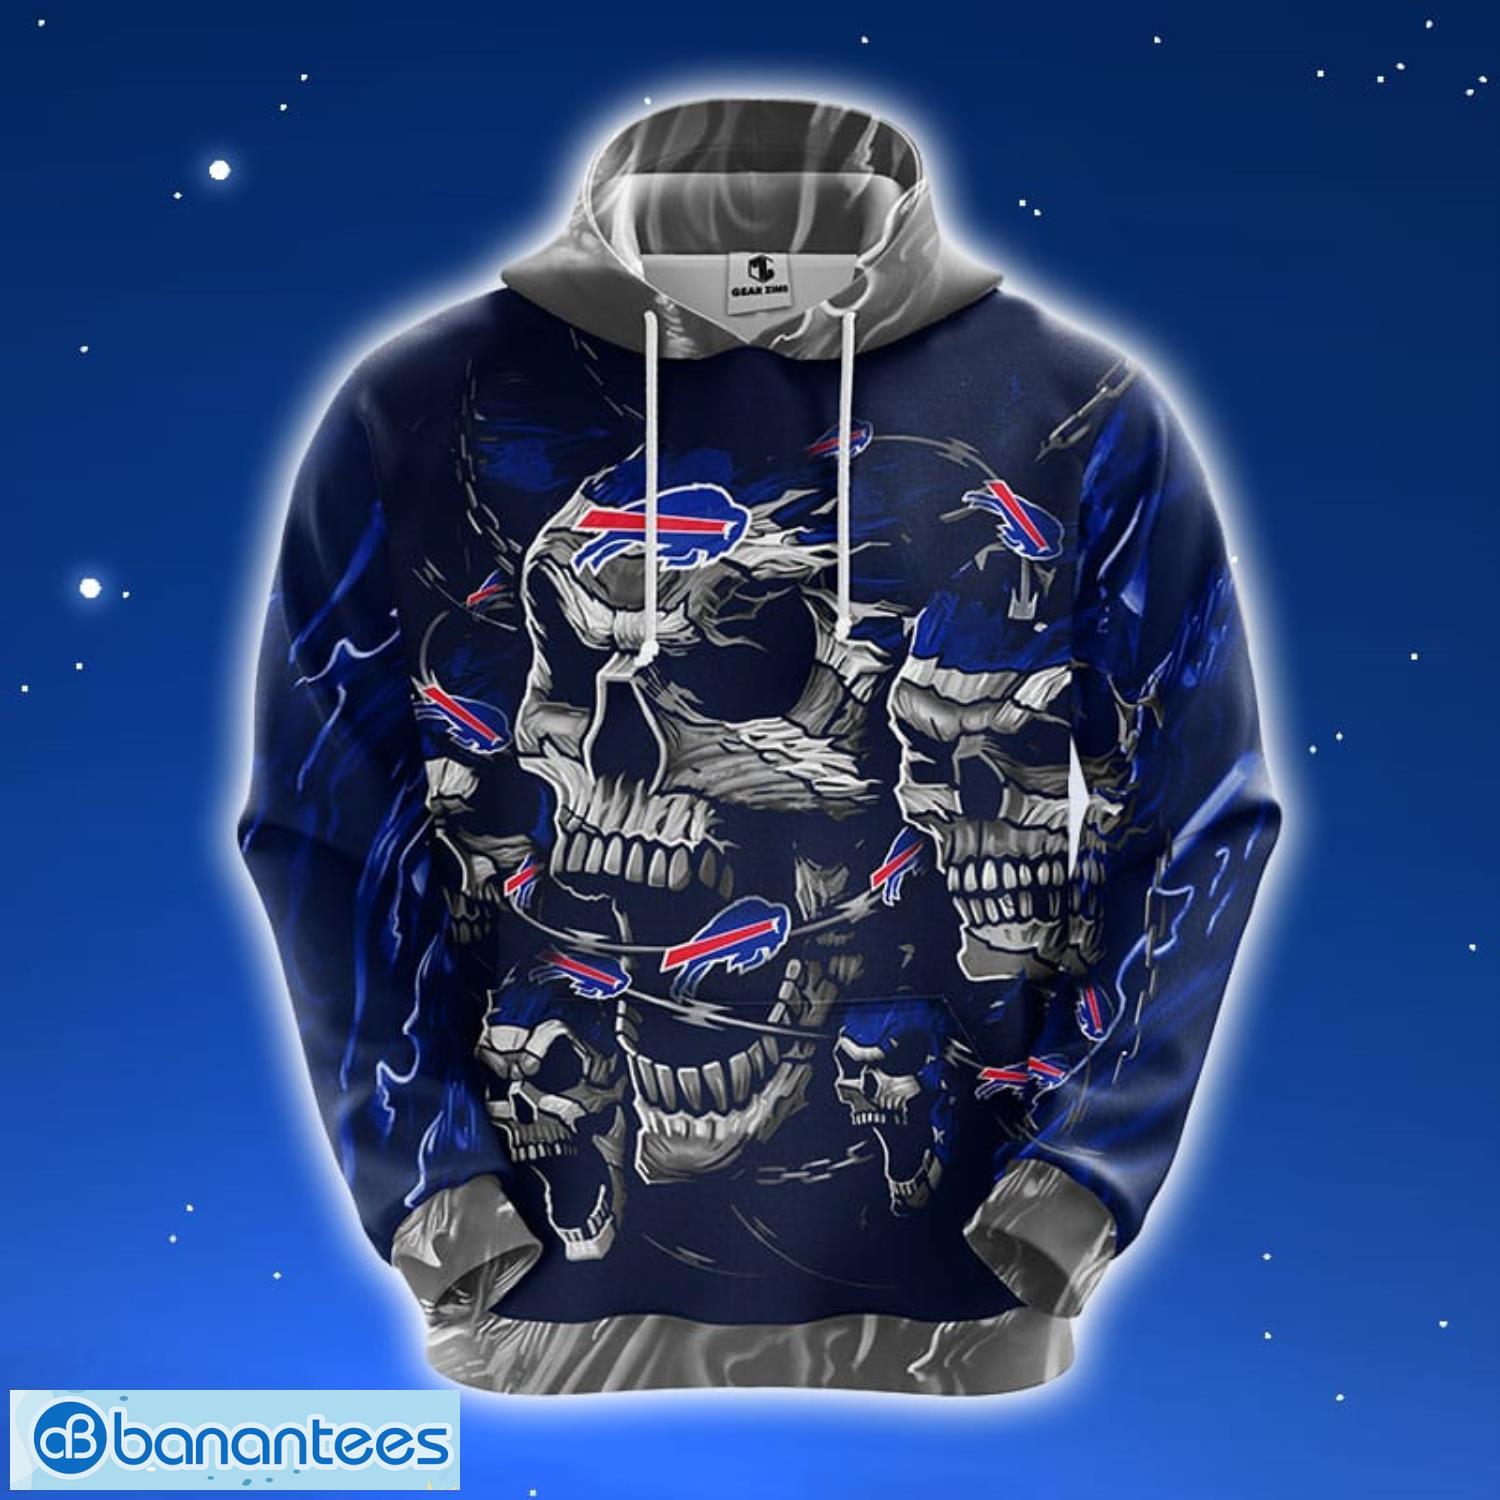 Carolina Panthers 3D Skull Zip Hoodie Pullover Shirt For Fans